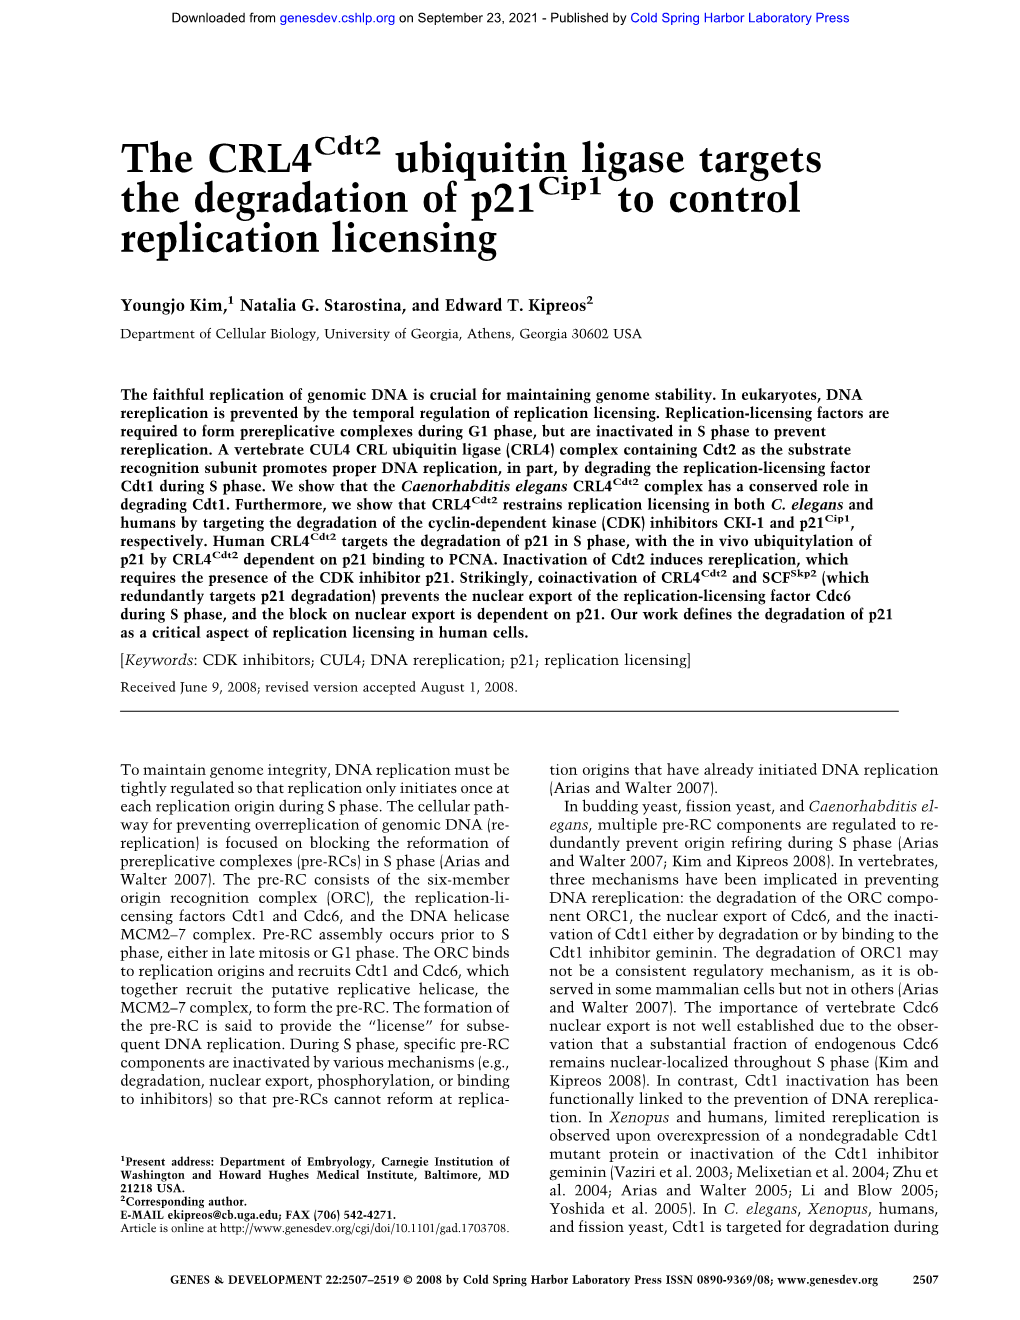 The CRL4 Ubiquitin Ligase Targets the Degradation of P21 to Control